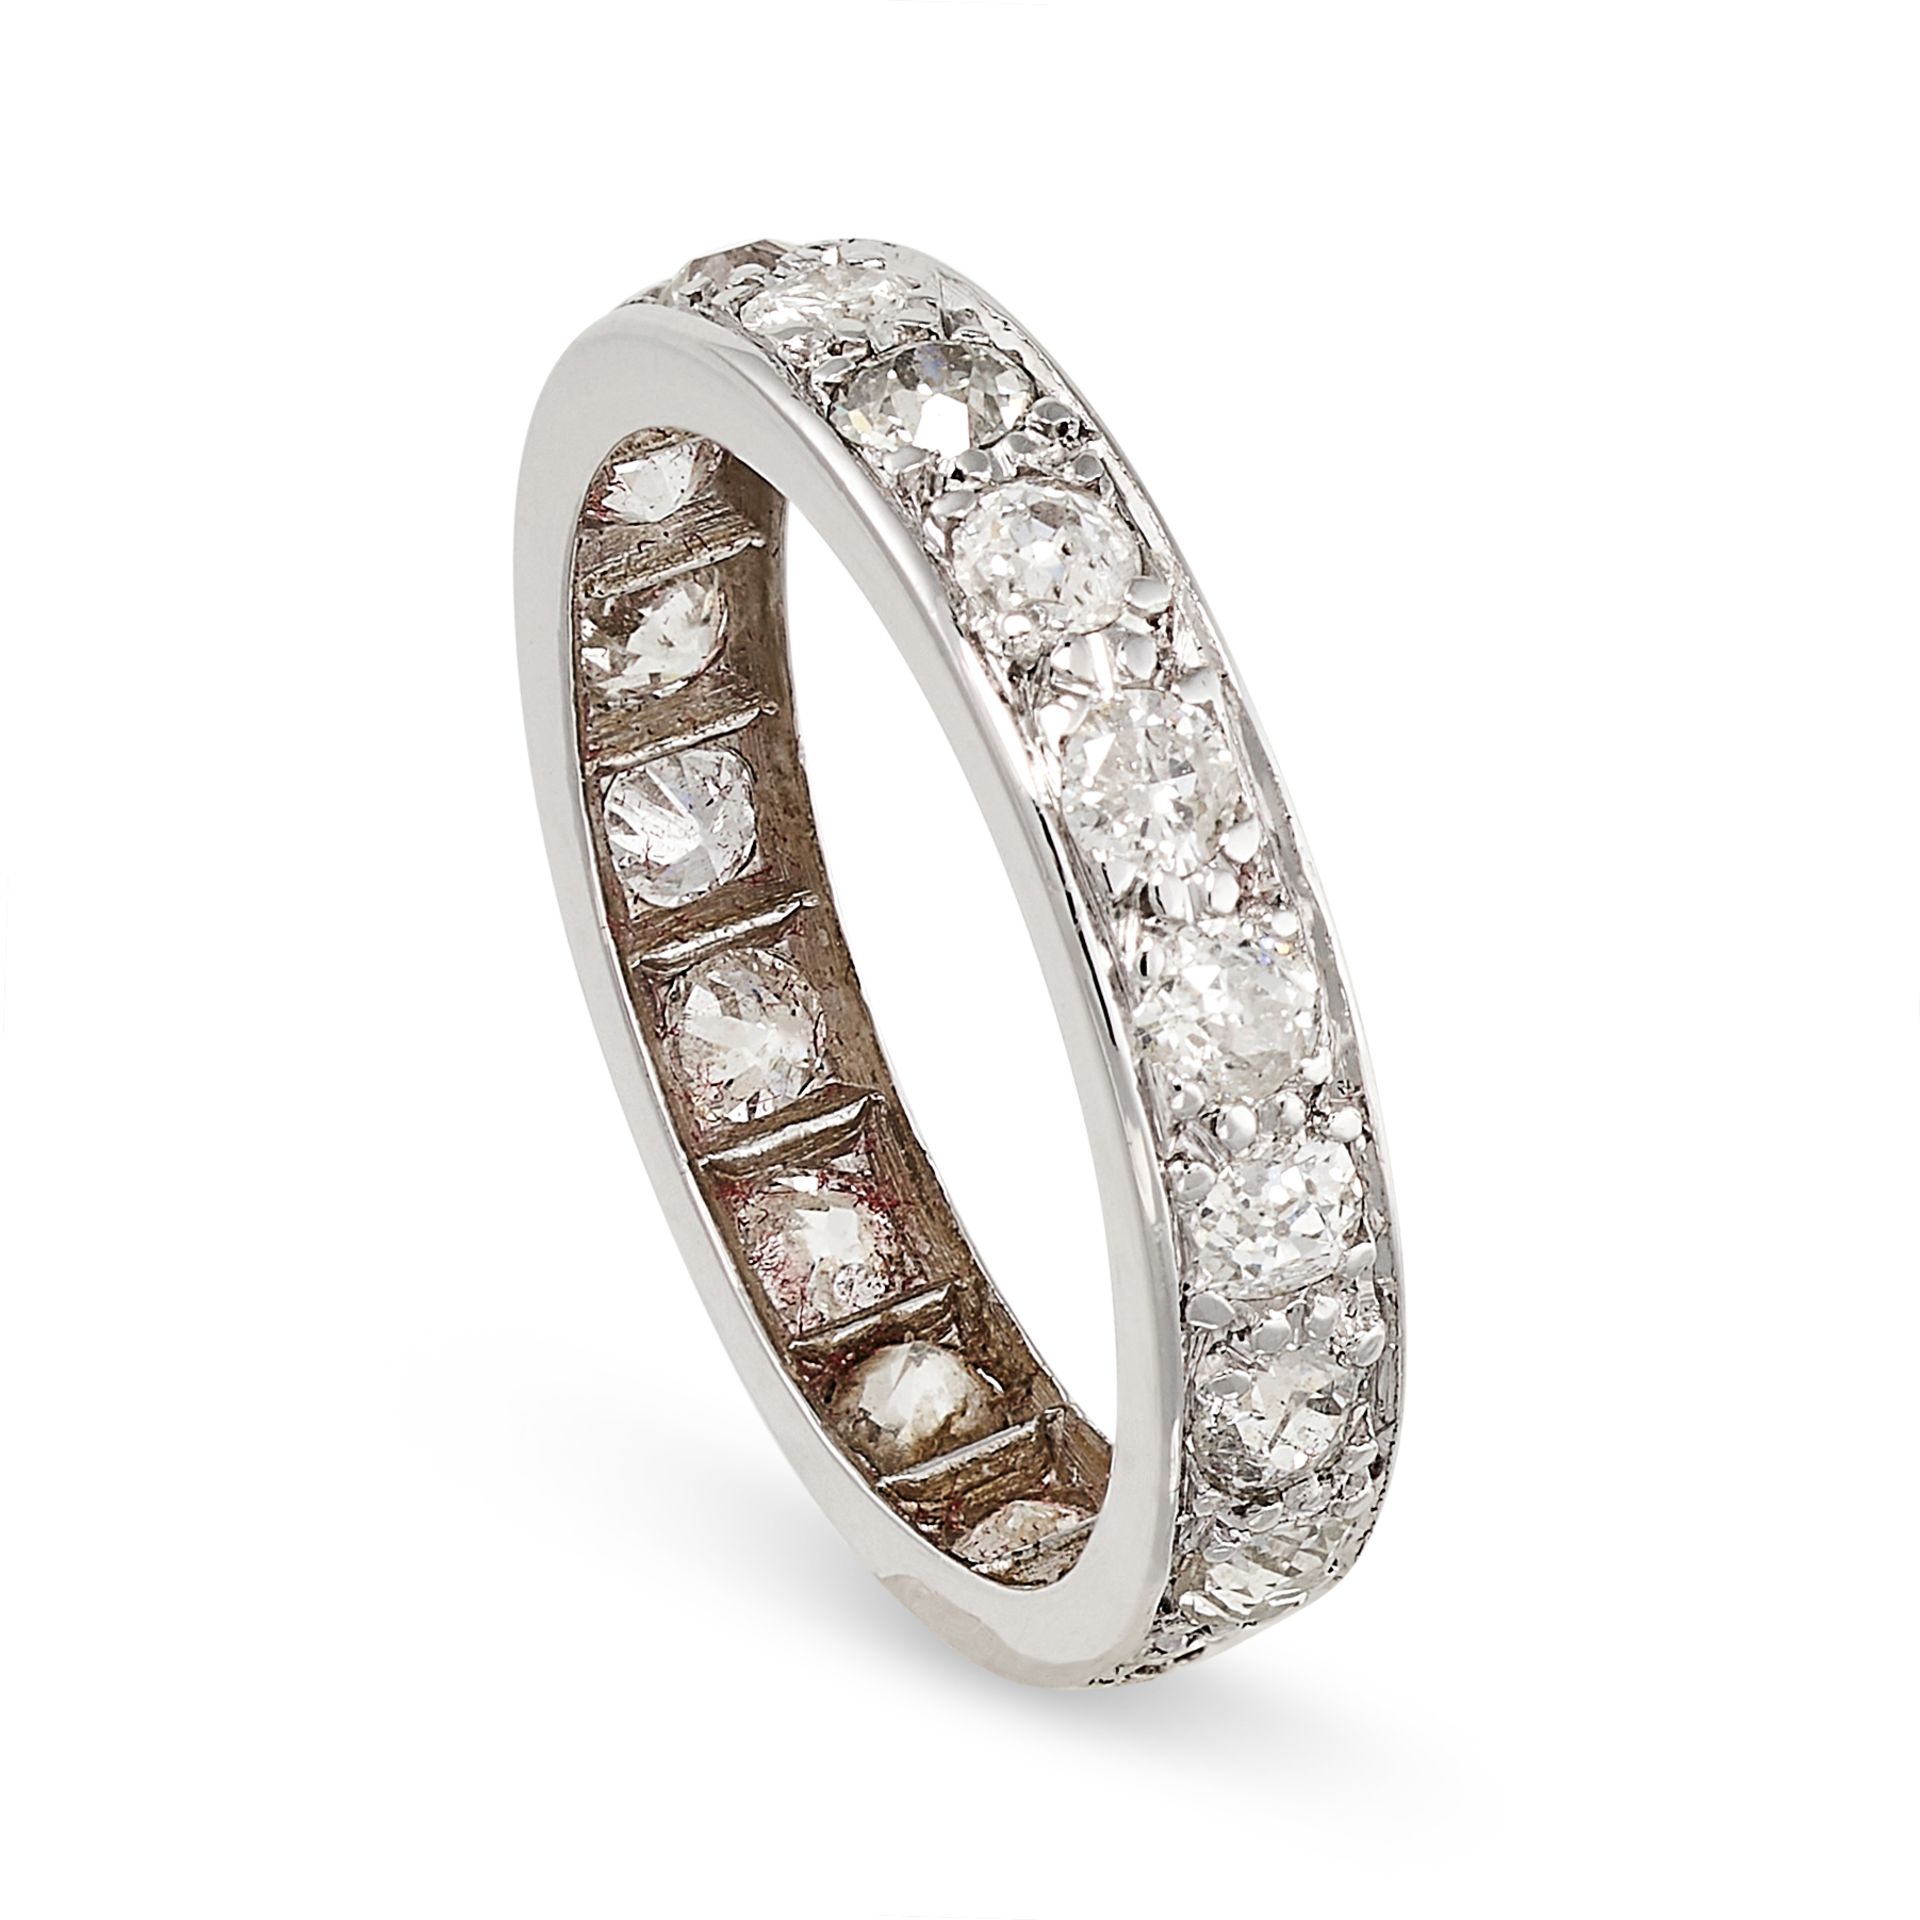 NO RESERVE - A DIAMOND FULL ETERNITY RING the band set all around with a row of old cut diamonds - Bild 2 aus 2